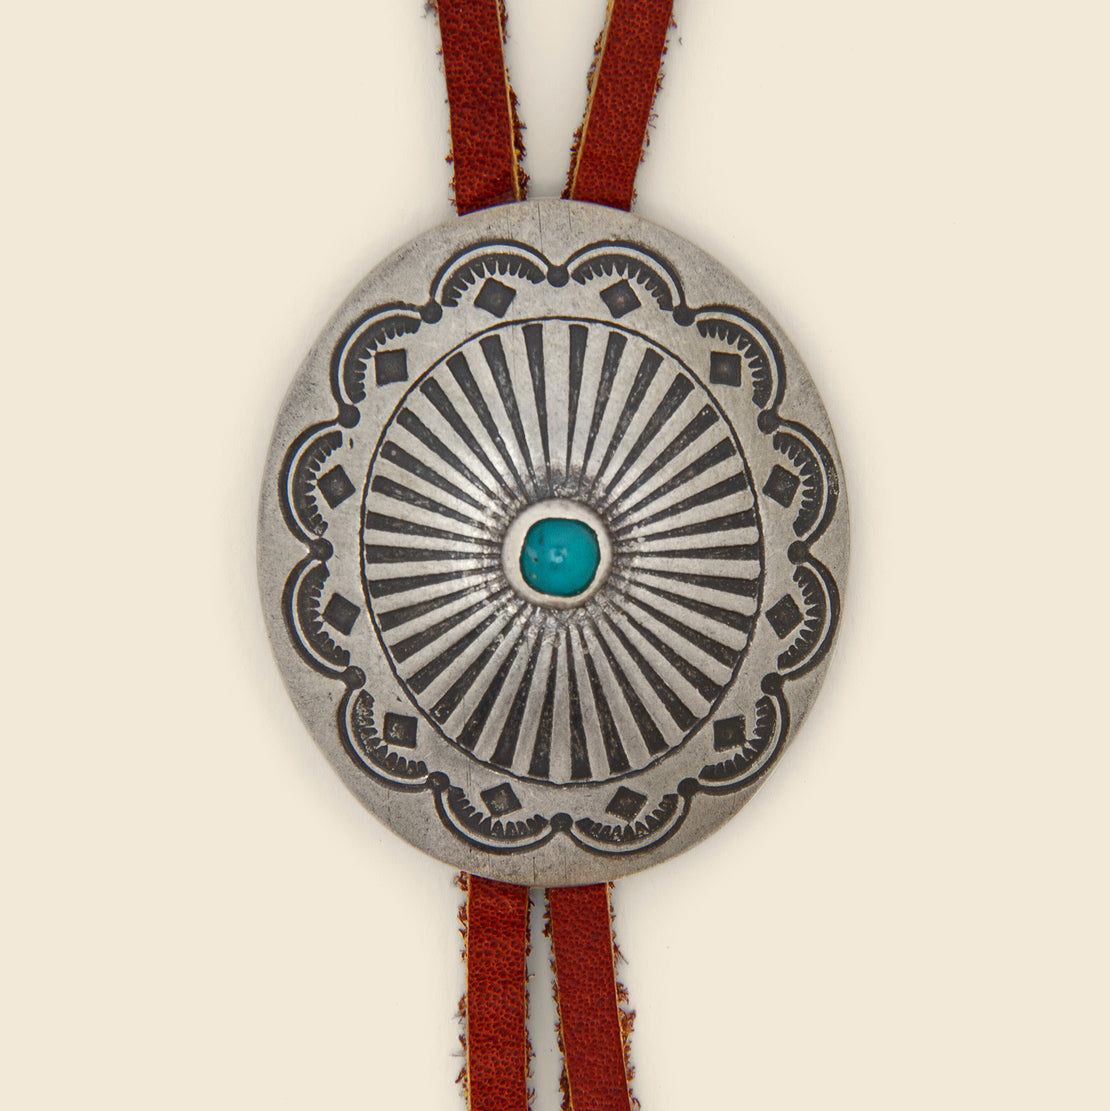 Leather Bolo Tie - Nickel Silver/Turquoise/Leather - Yuketen - STAG Provisions - Accessories - Ties